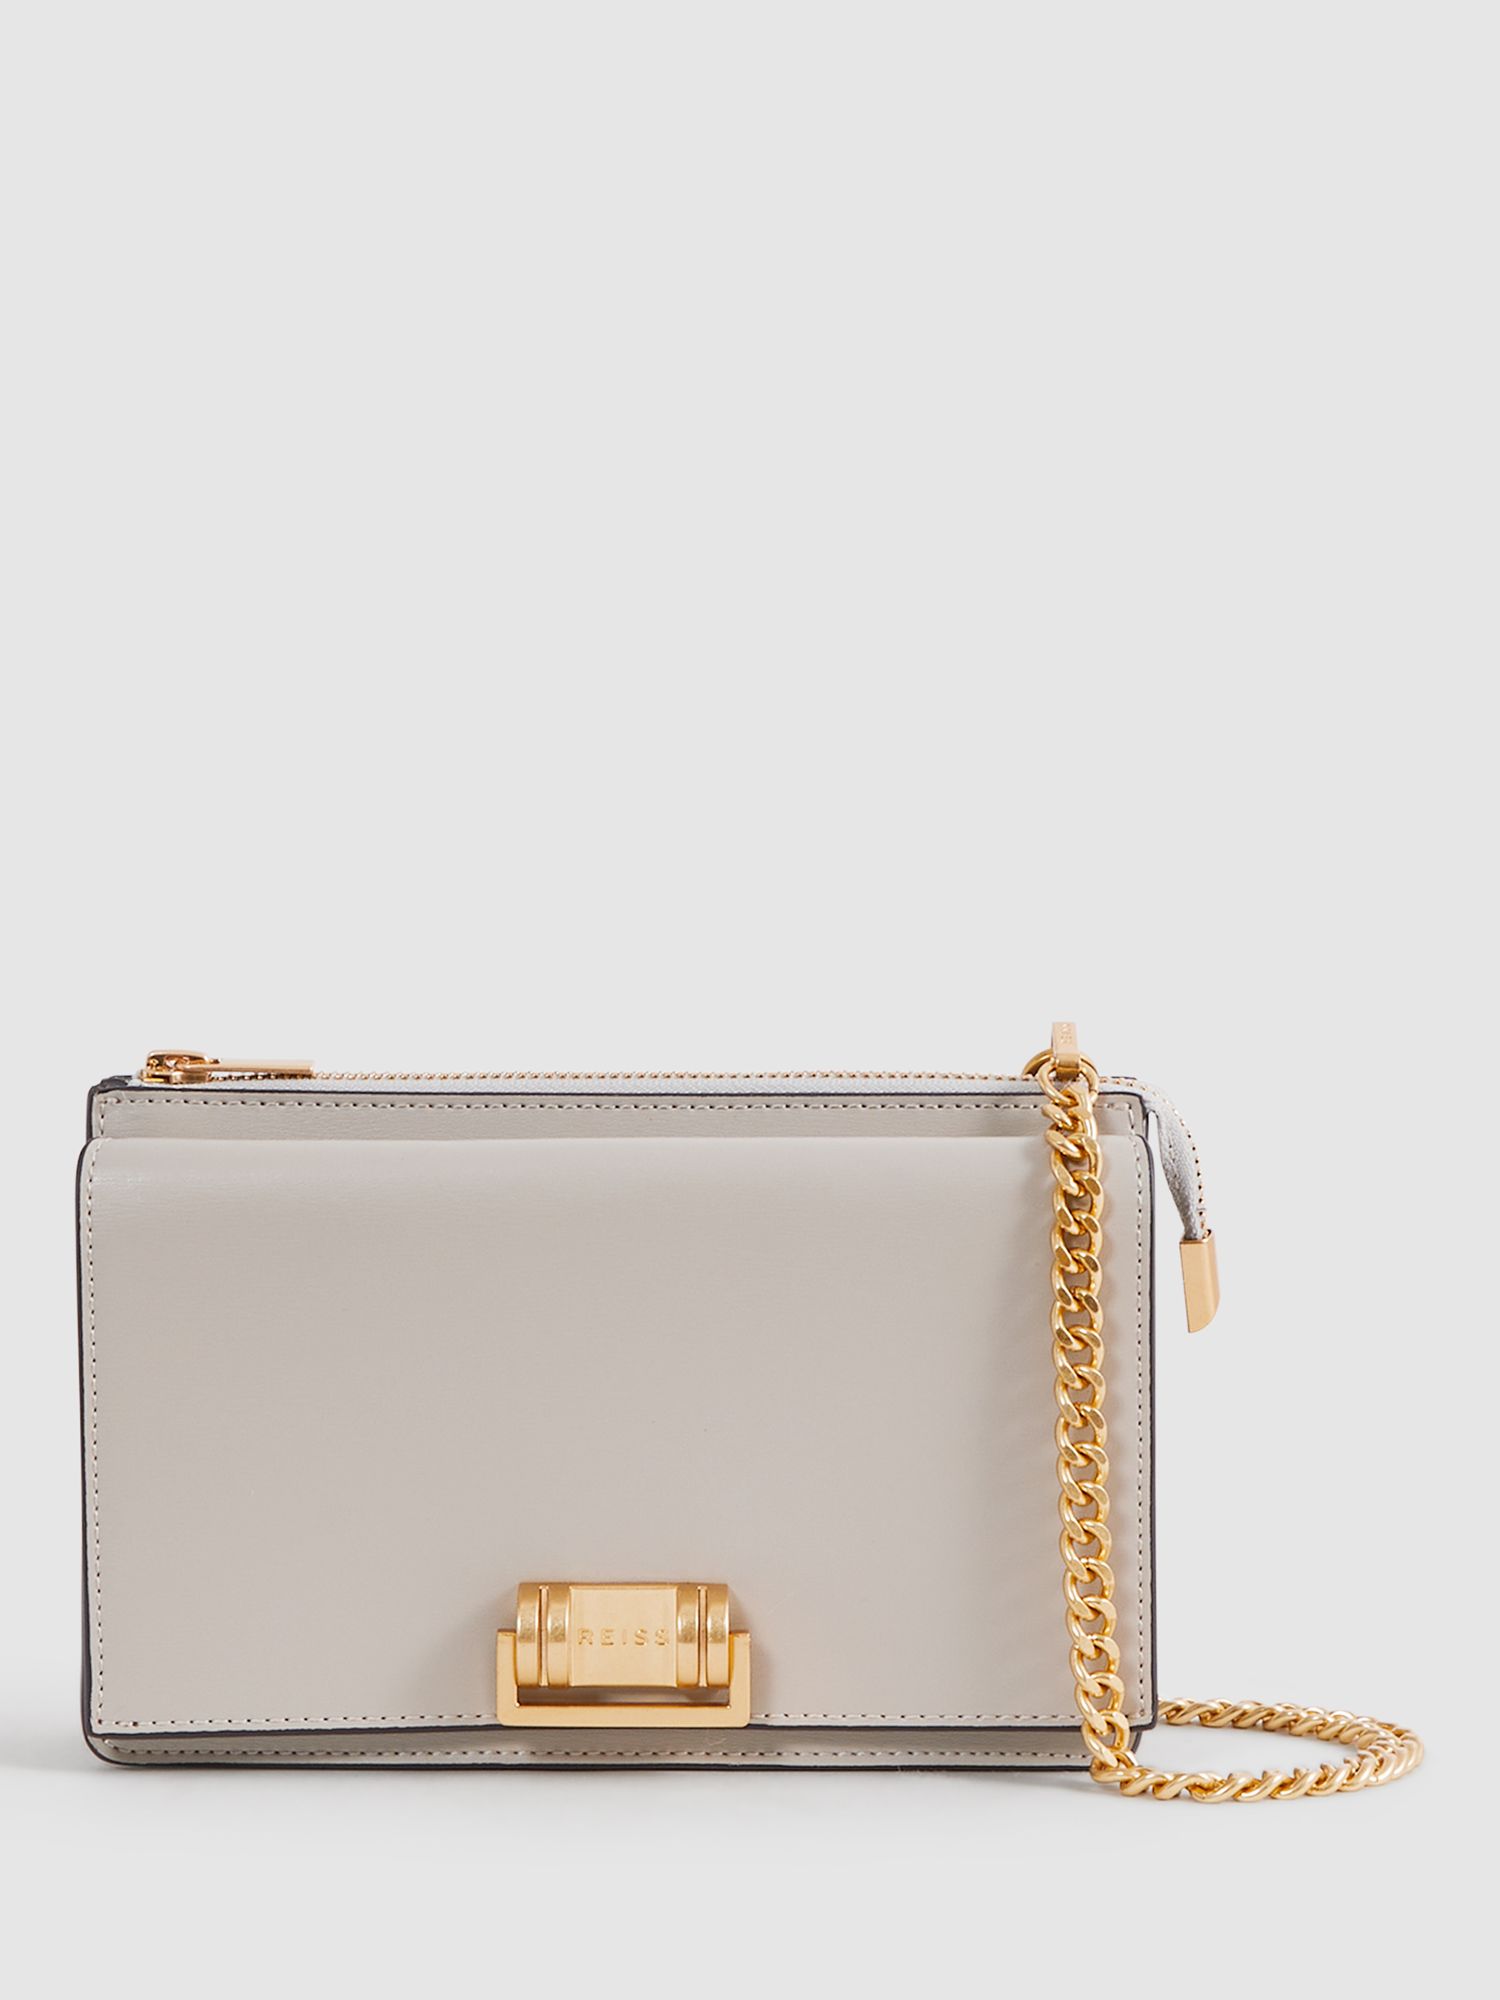 Reiss Picton Chain Strap Leather Crossbody Bag, Grey, One Size